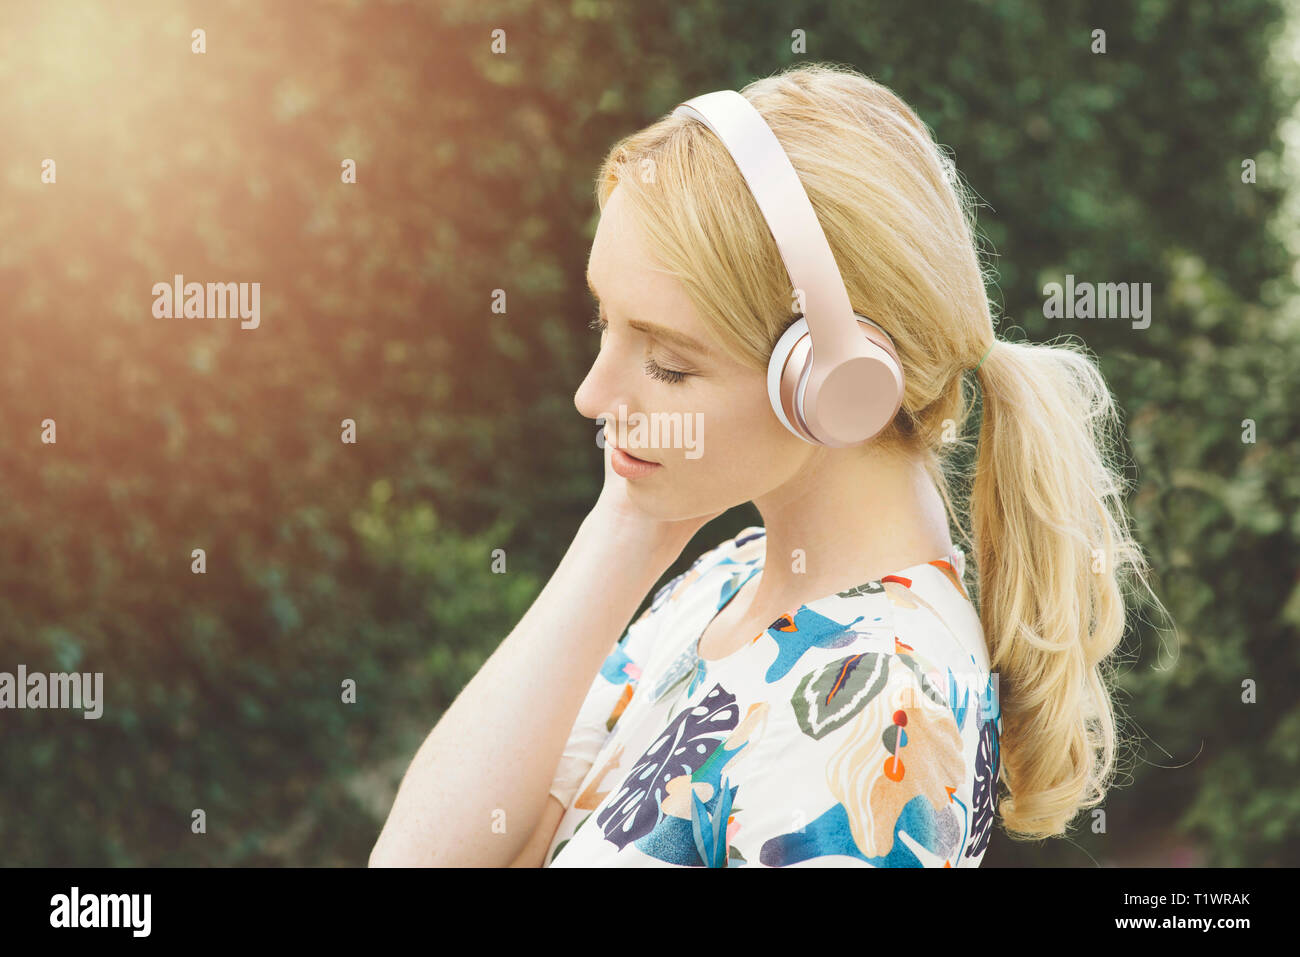 View of young Caucasian woman listening to music and being inspired in an outdoor setting Stock Photo